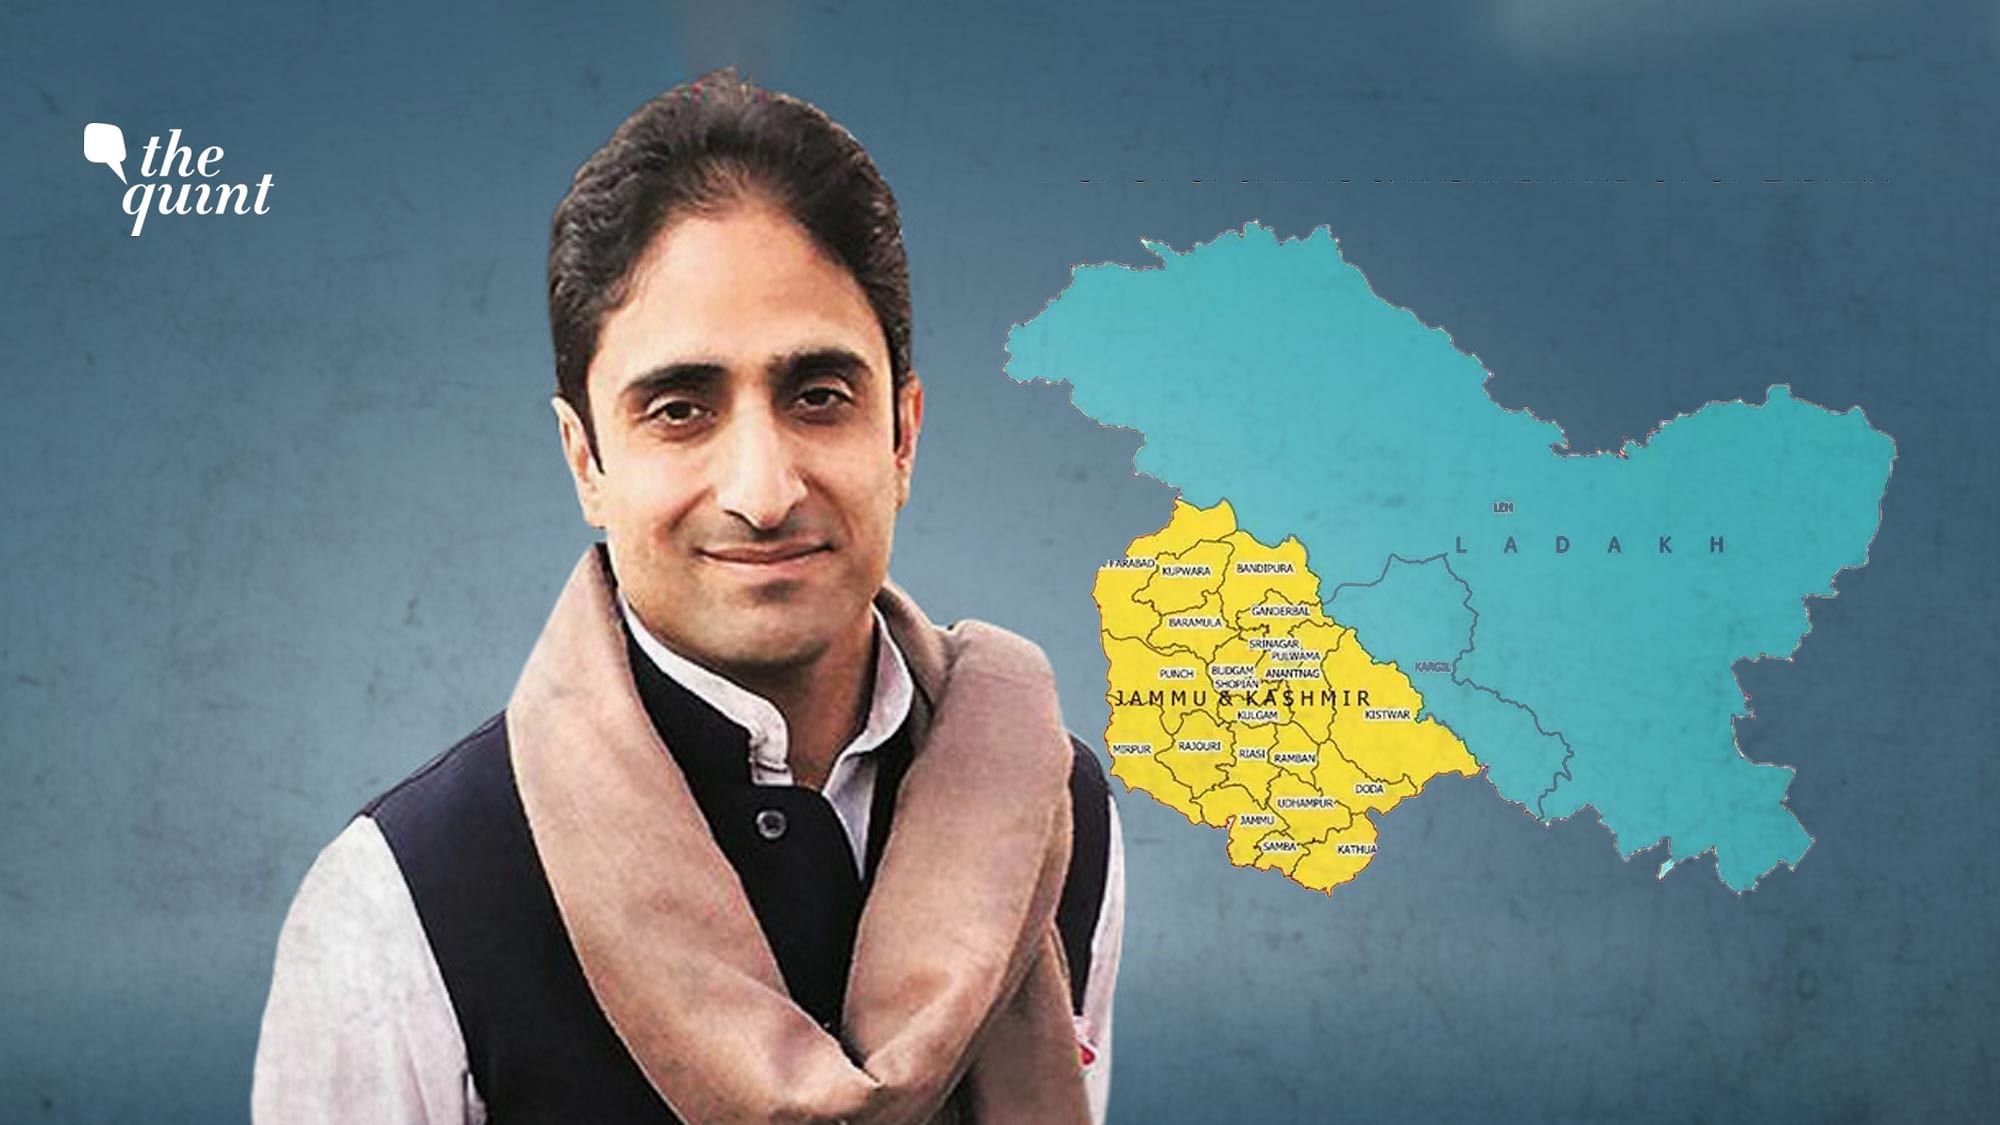 Srinagar Mayor Junaid Azim Mattu was defeated on Tuesday as the no confidence motion against him was supported by 42 votes among the 70 councillors of the Srinagar Municipal Corporation (SMC).